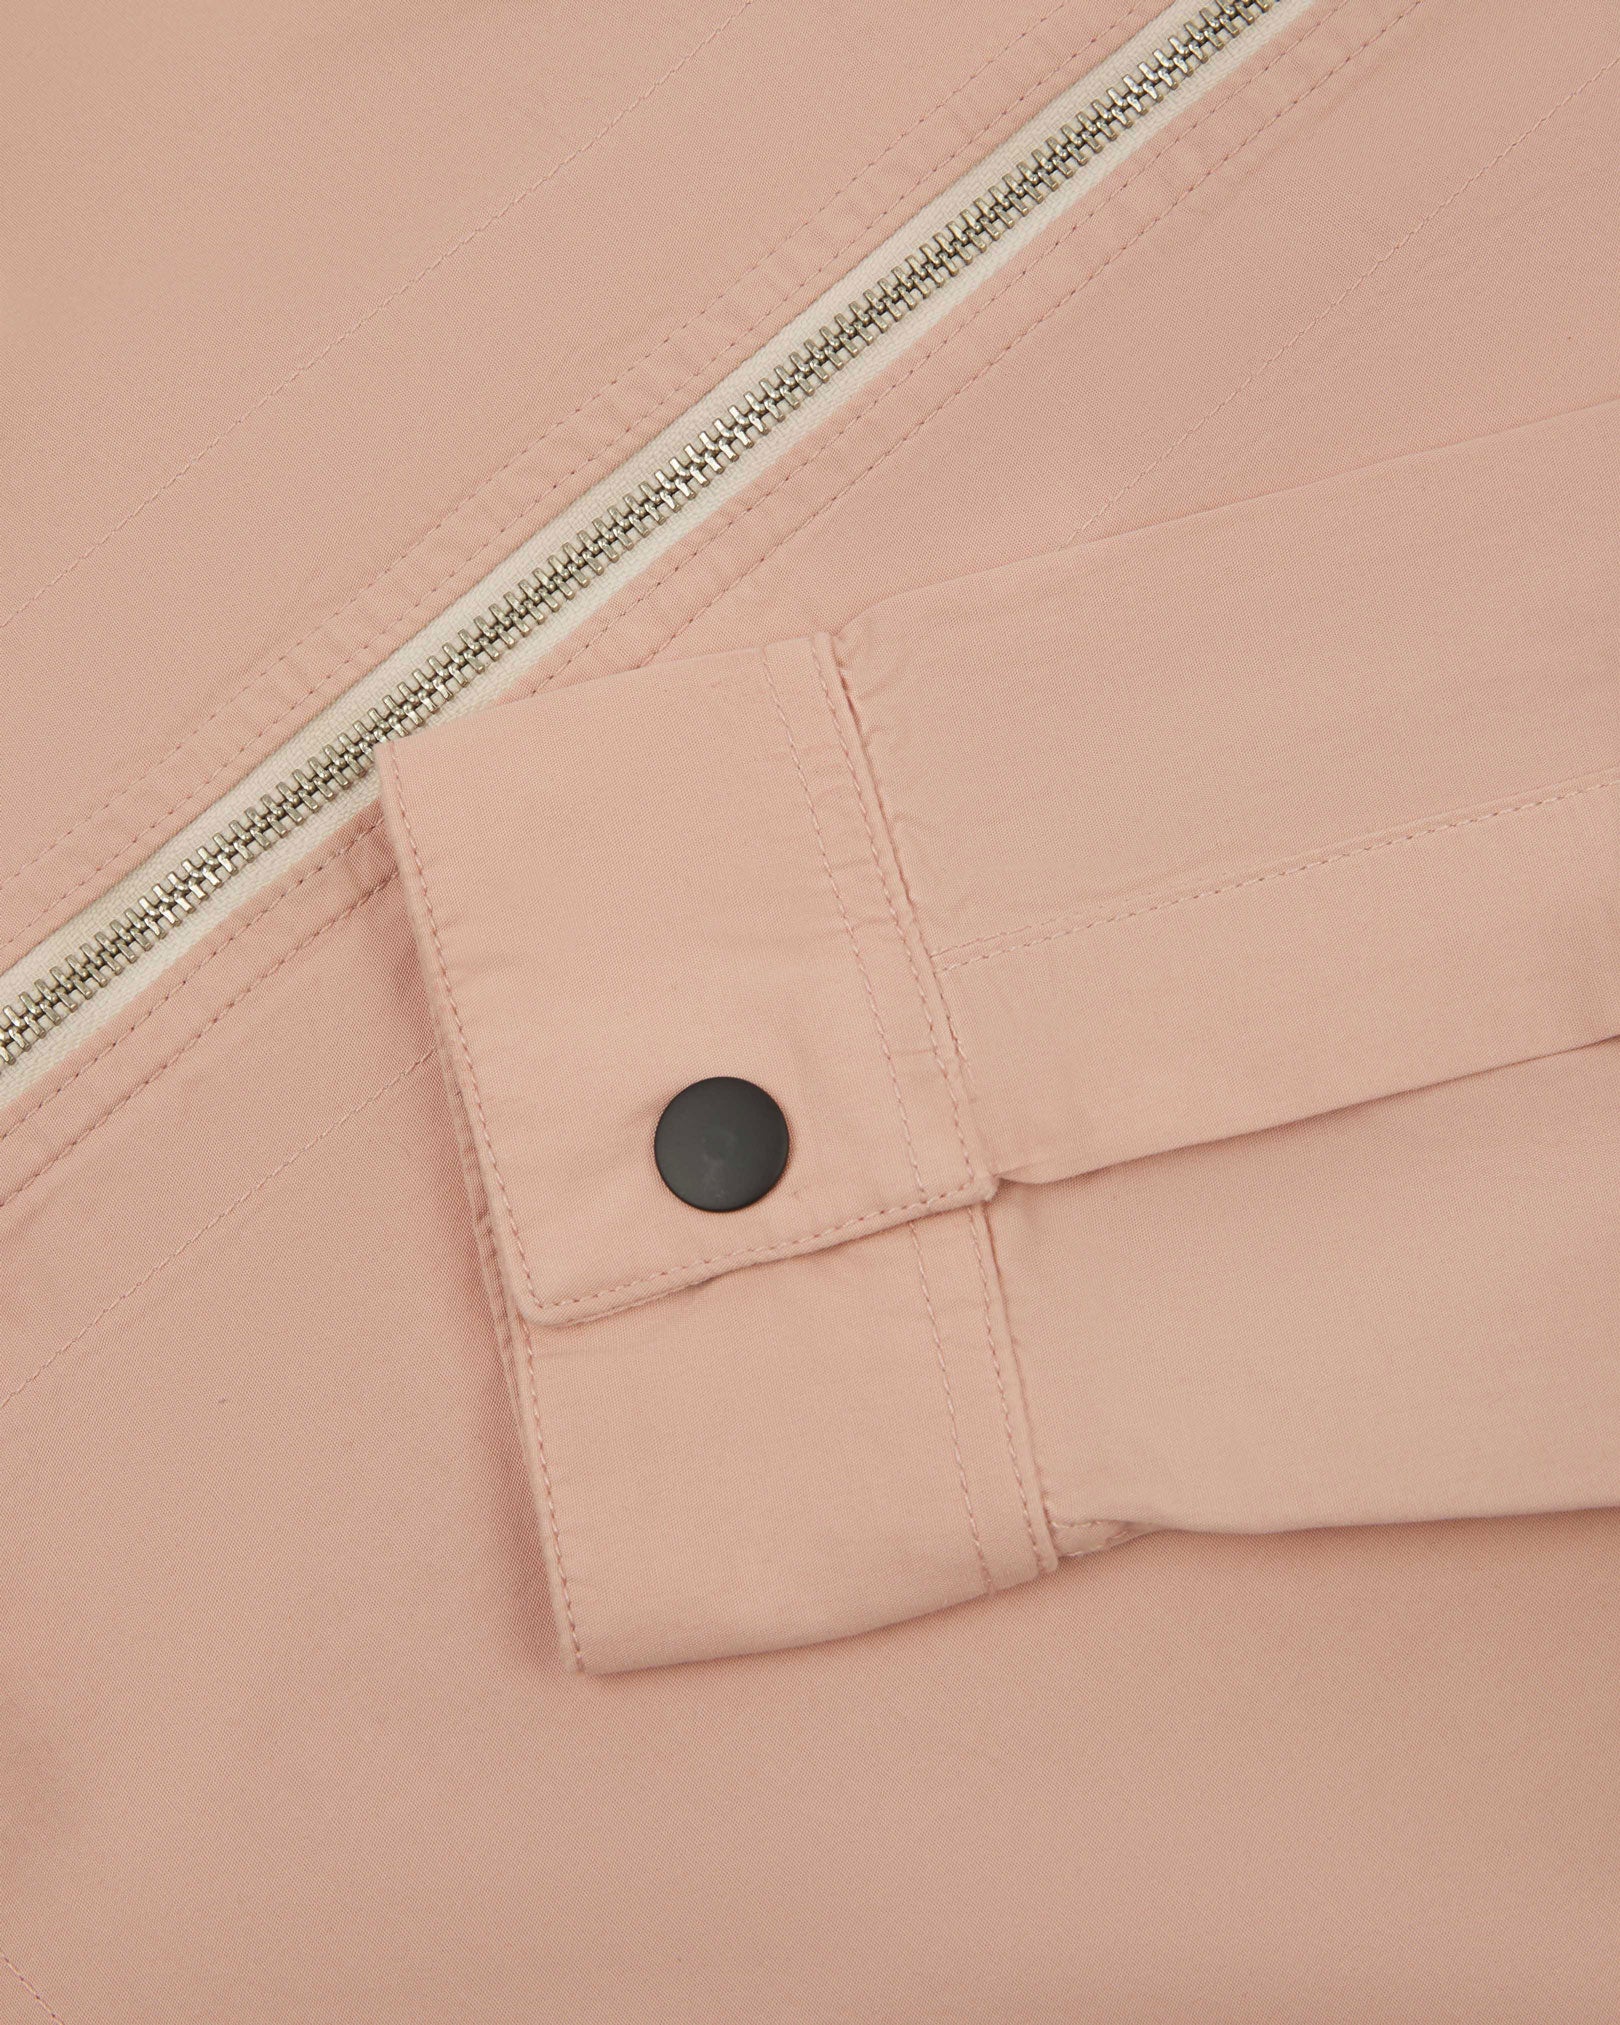 View of the mid-section of the dusty pink 6002 lightweight jacket from Uskees, with focus on the cuff and front zipper detail.